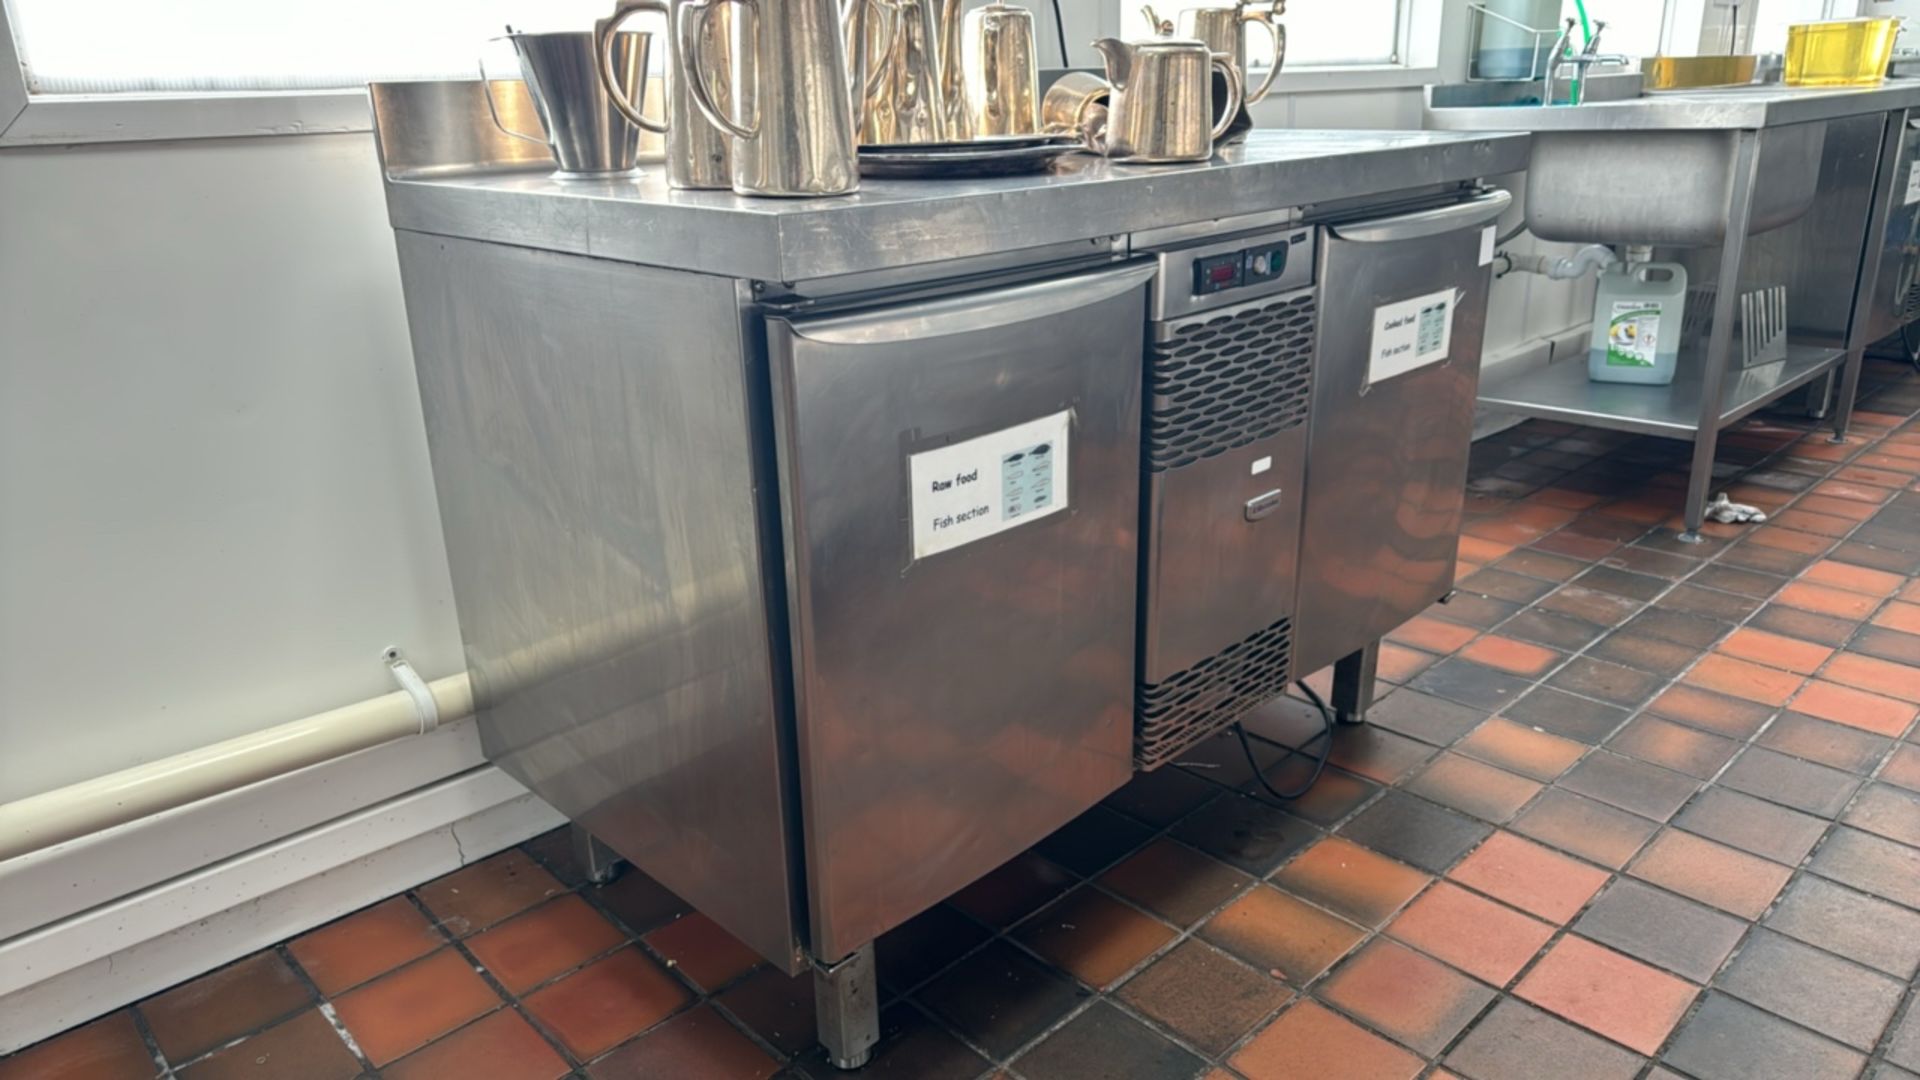 Electrolux Stainless Steel Preparation Unit With Under Counter Fridges - Image 2 of 6